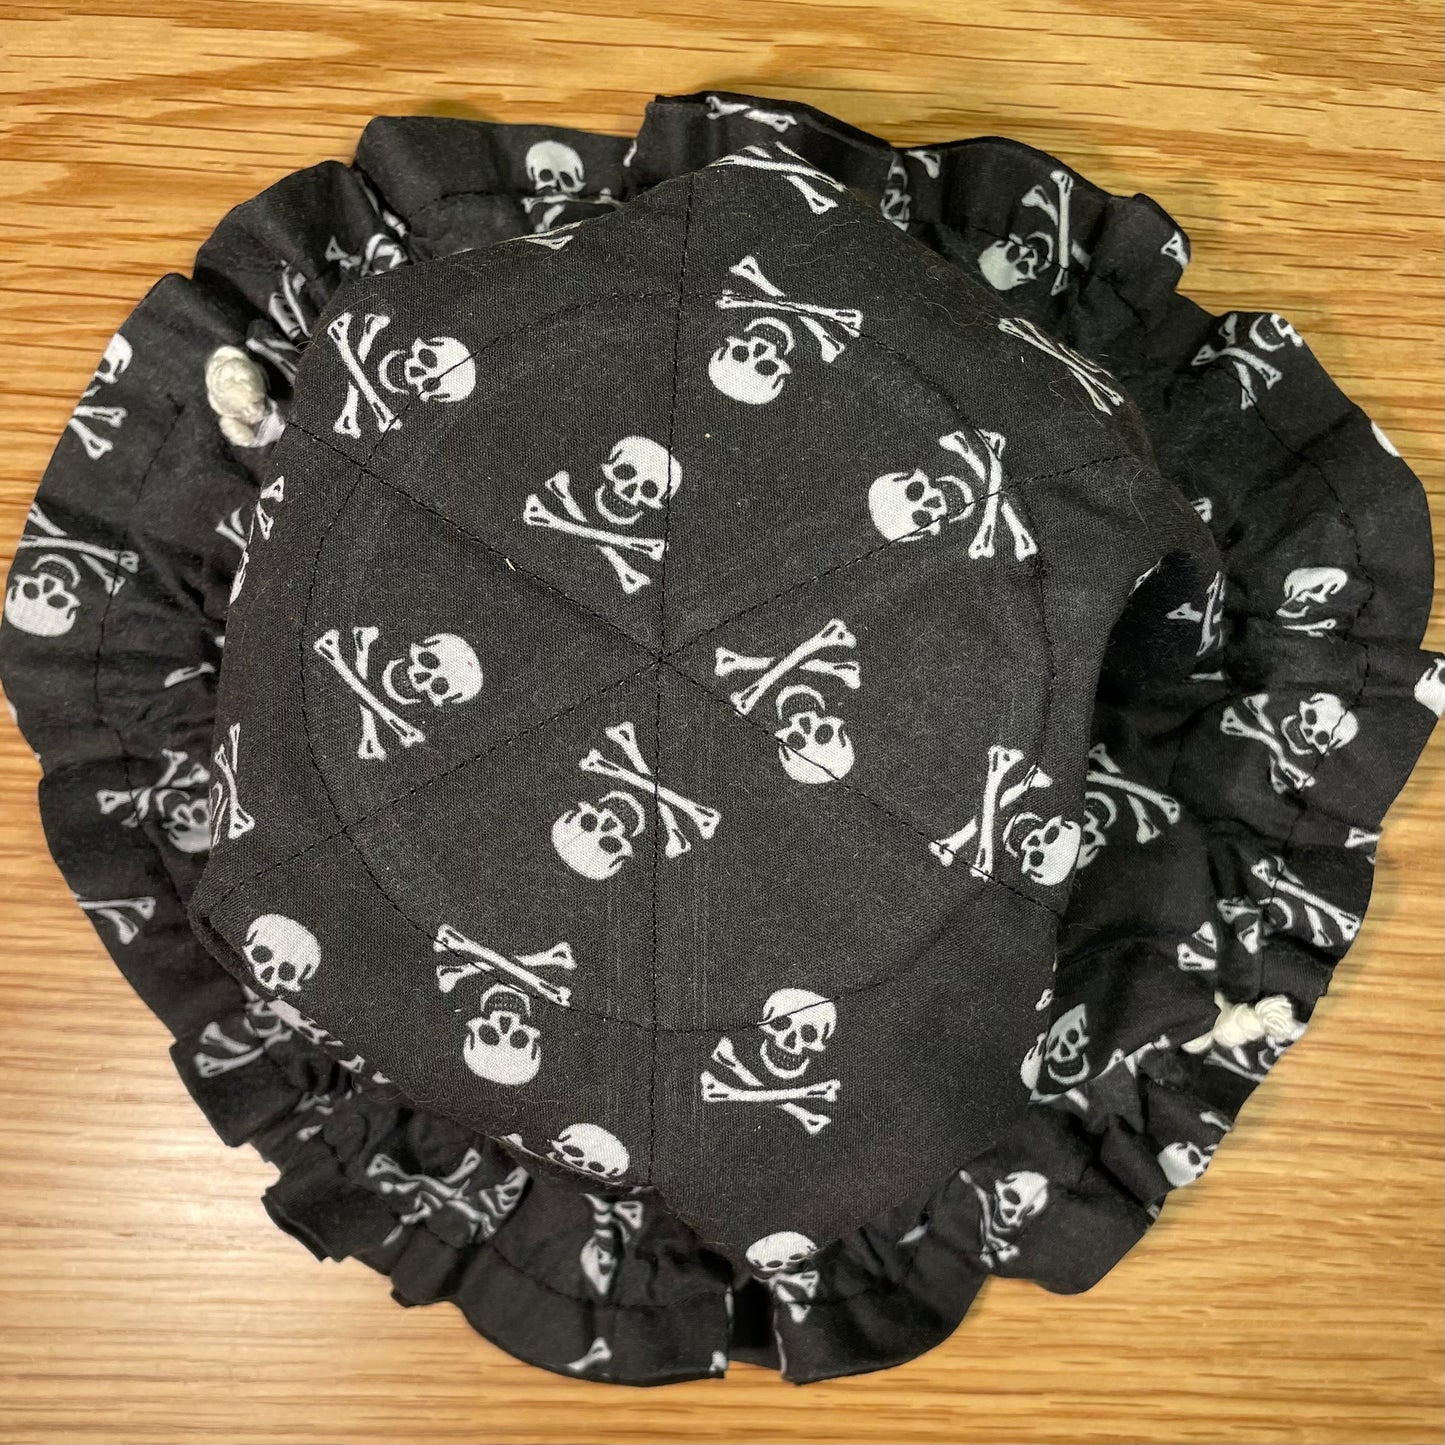 Pirate Bag of Dice Holding